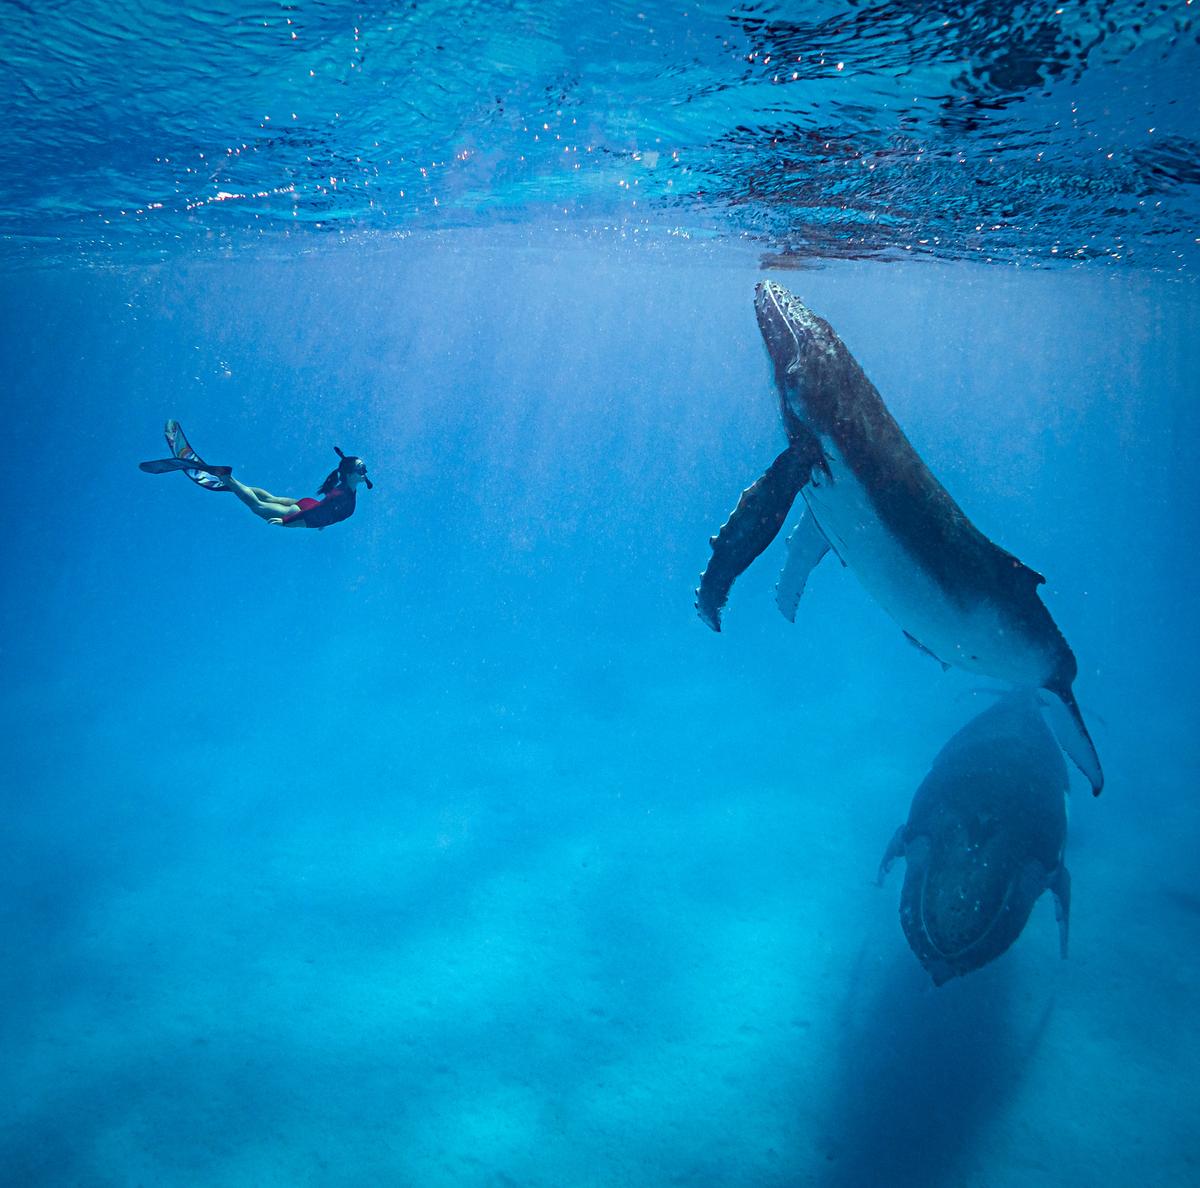 Freediving model Alice Edgar with a whale calf. (SWNS)